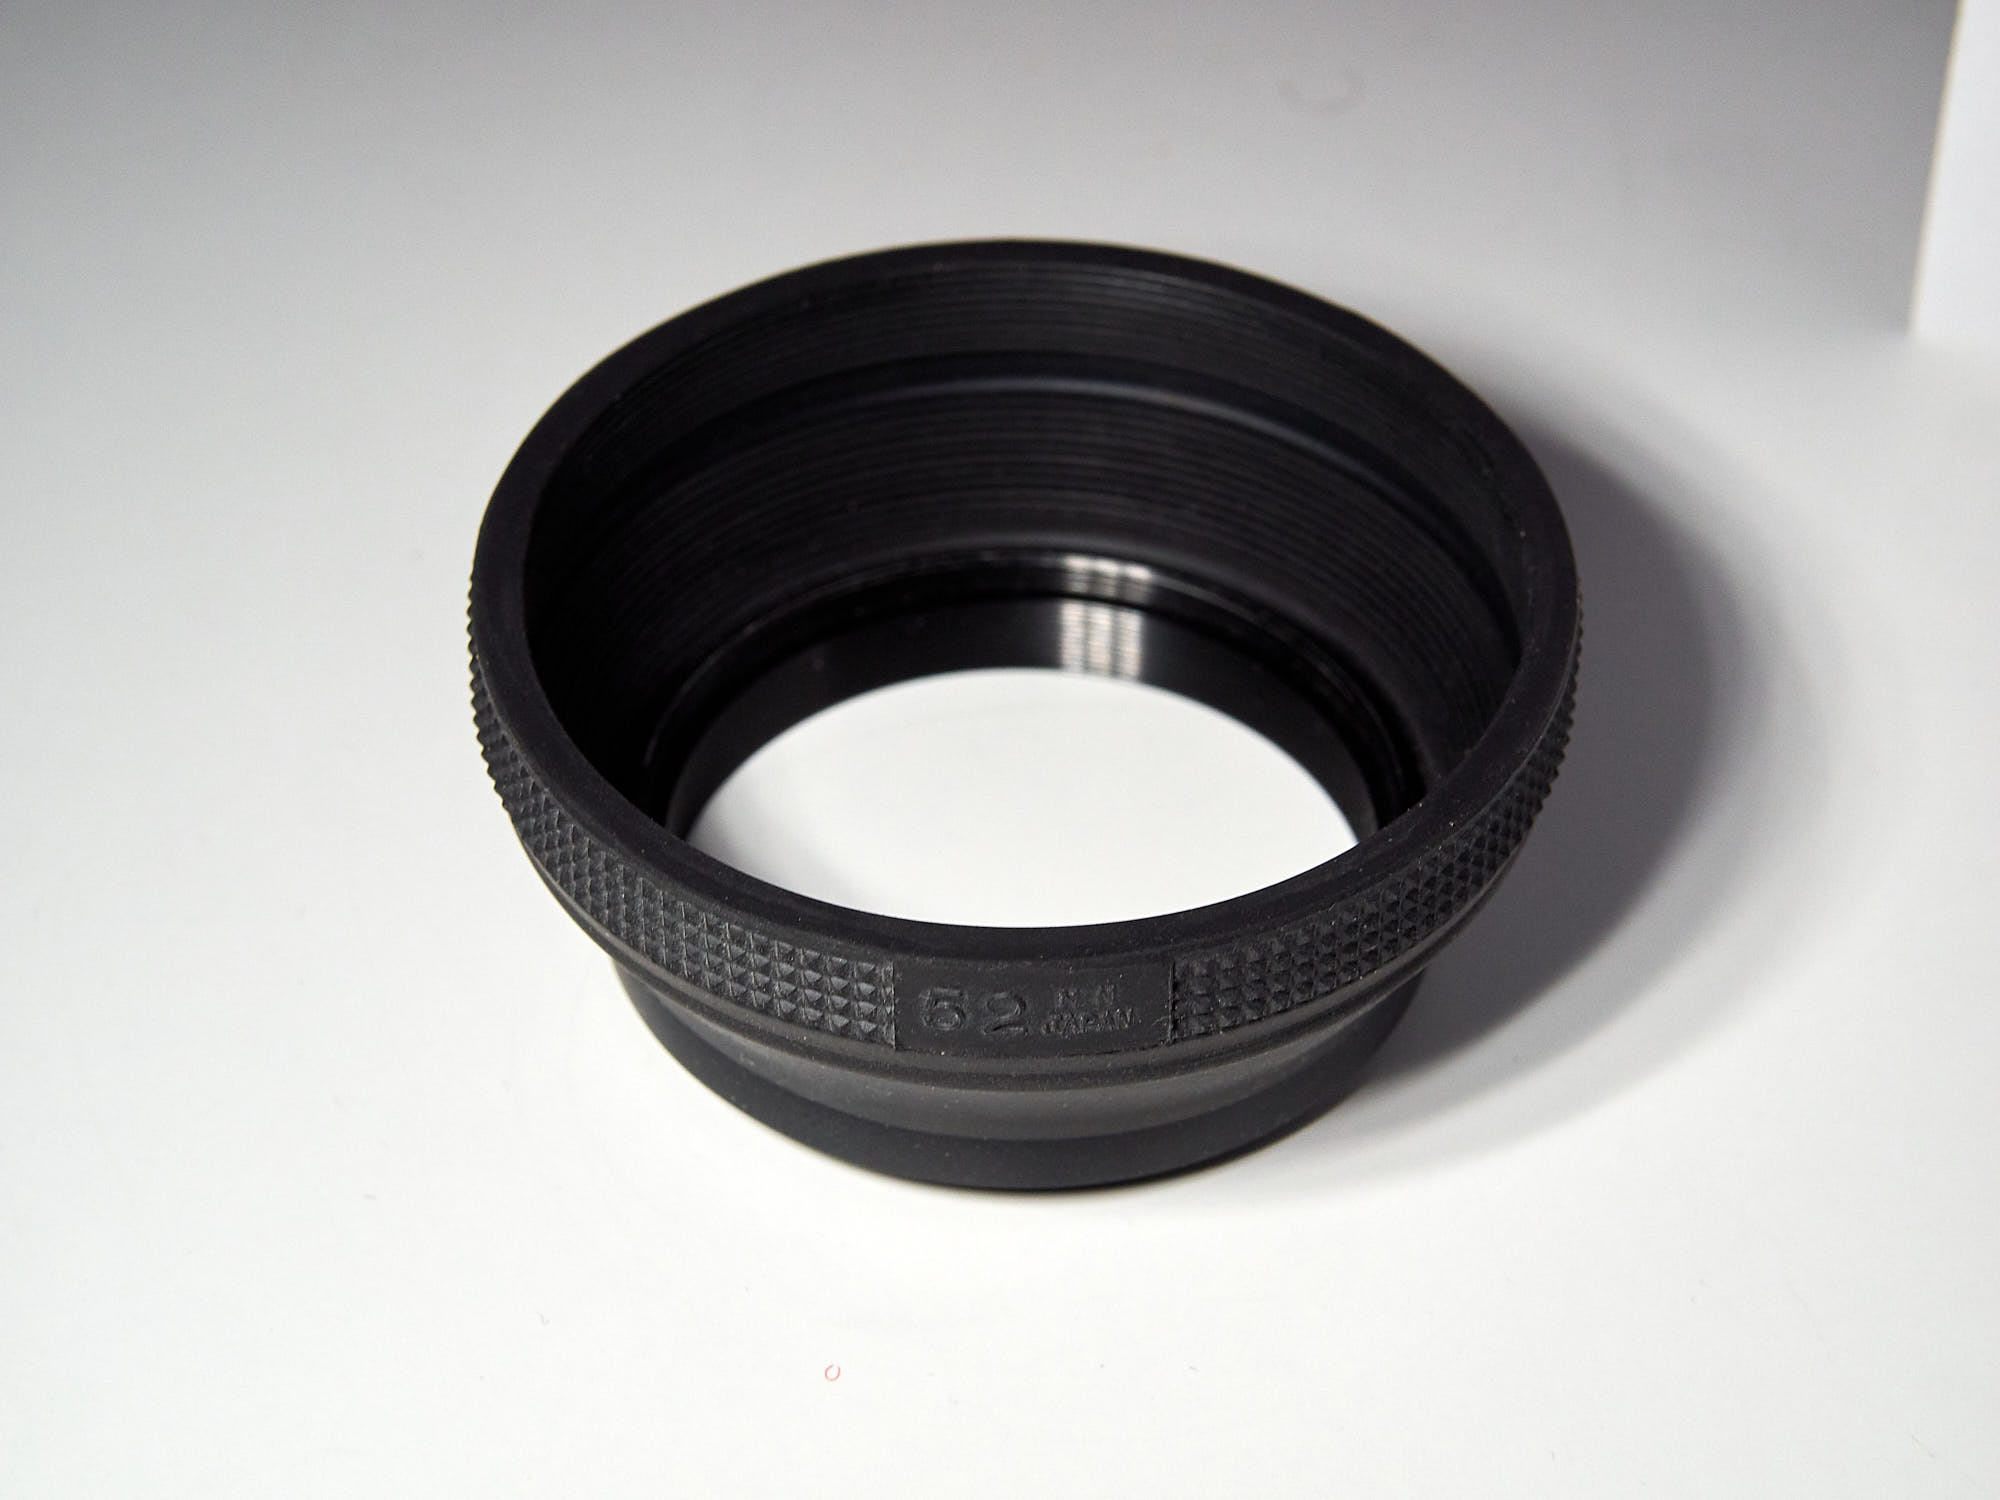 Collapsible rubber lens hood, extended.